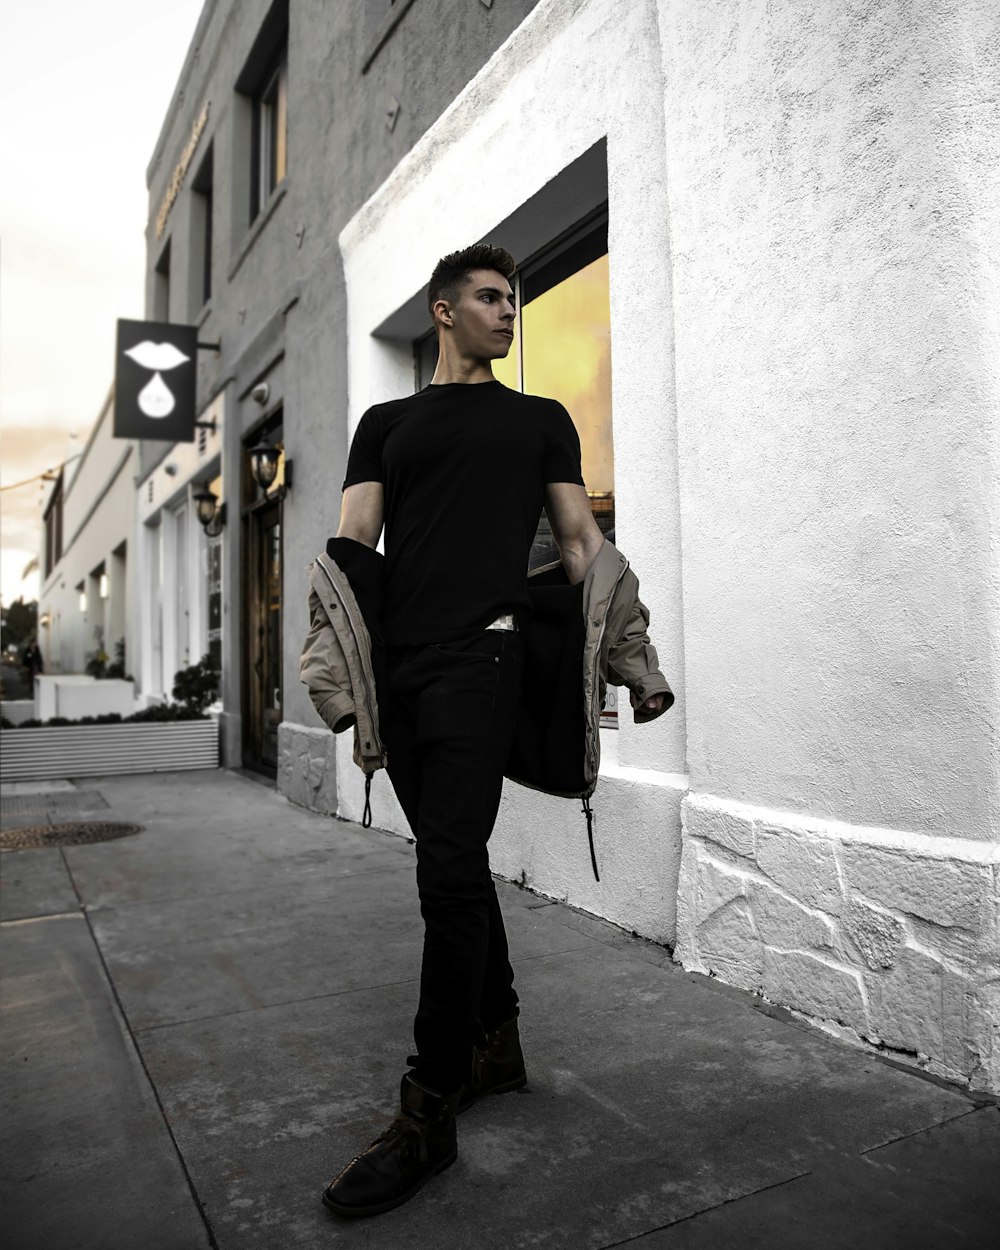 Man in black shirt and gray pants leaning on wall photo – Free Clothing  Image on Unsplash